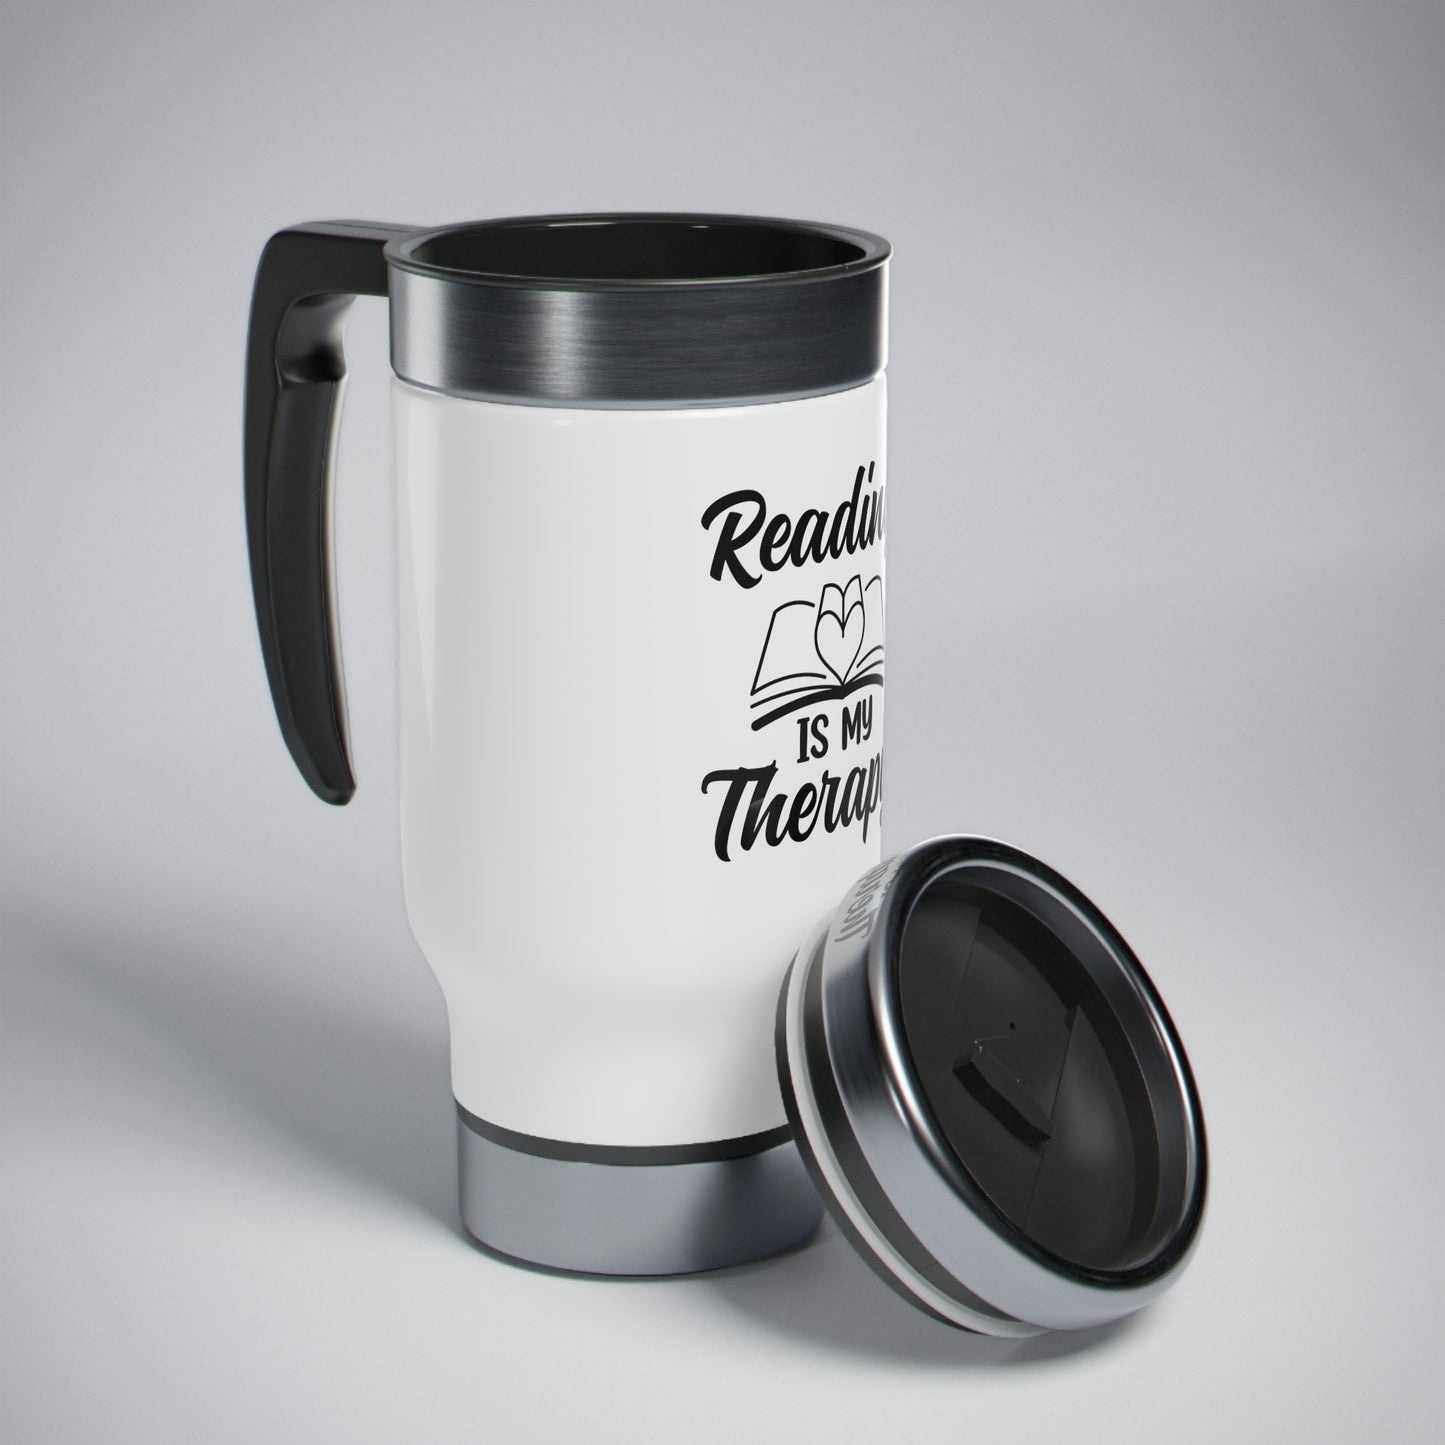 "Reading Is My Therapy" Stainless Steel Travel Mug with Handle, 14oz